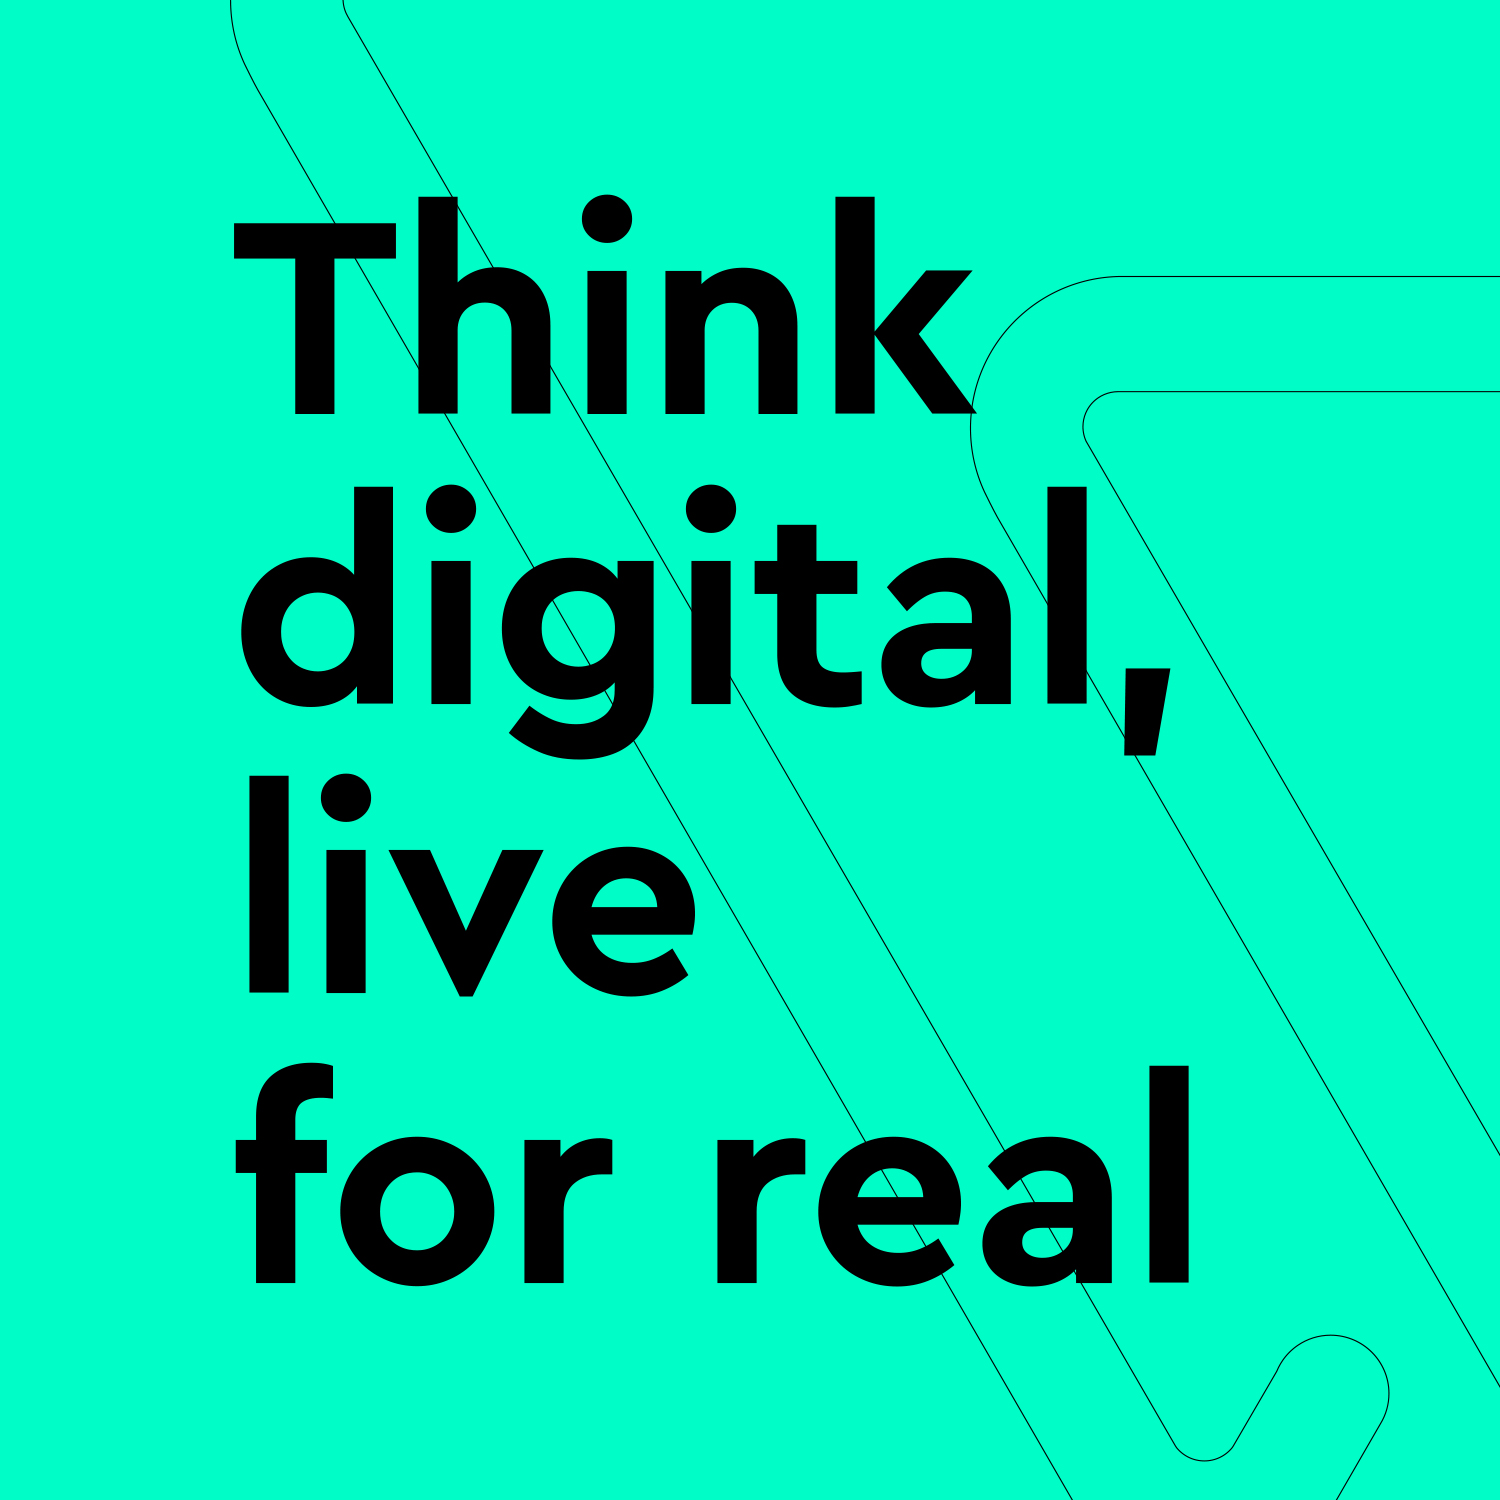 Think digital, live for real with NOWR